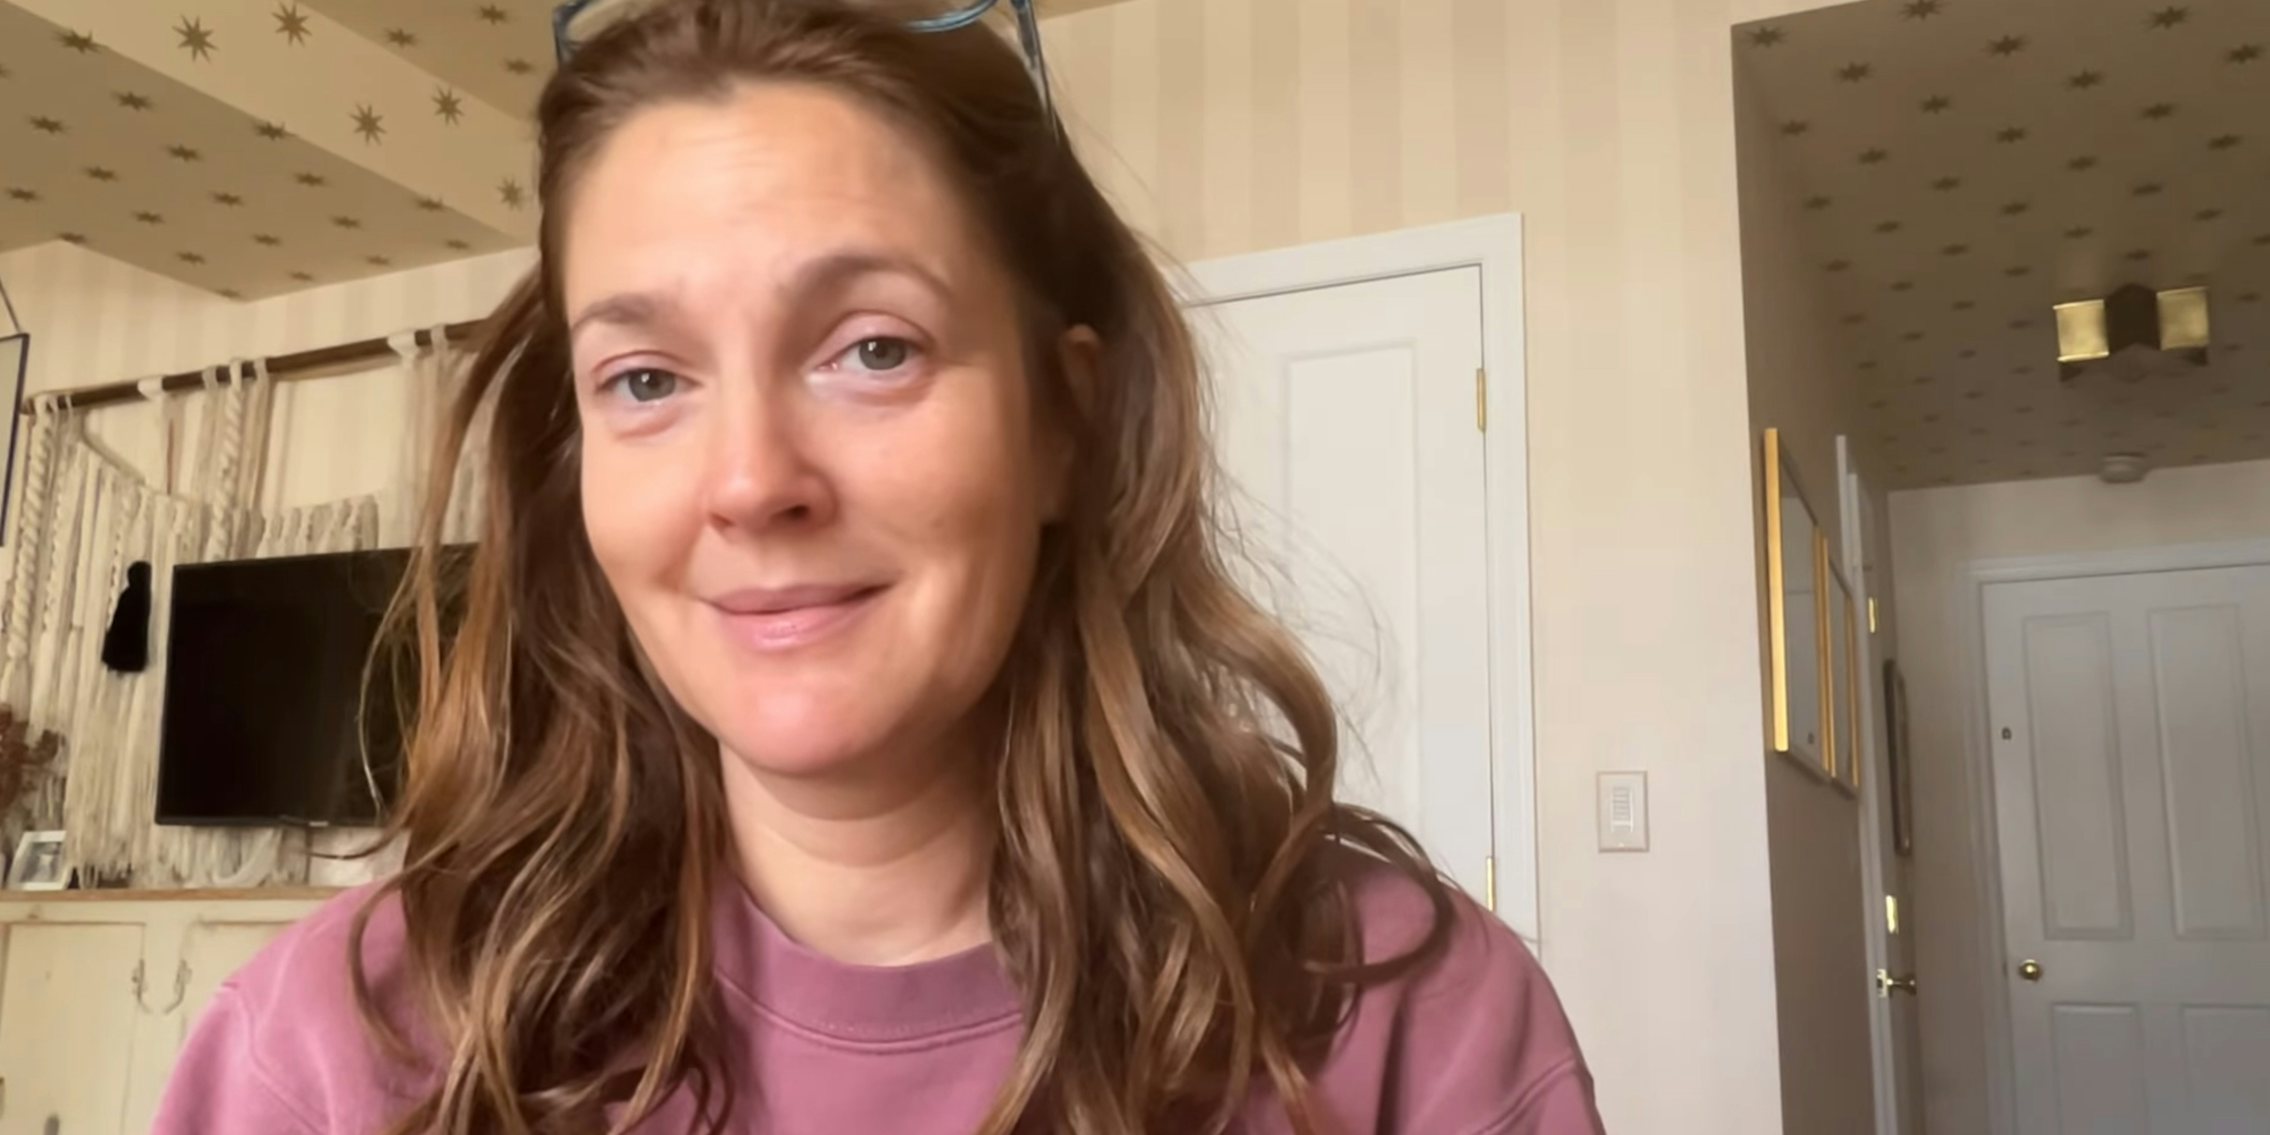 Drew Barrymore apologizes, is still bringing show back